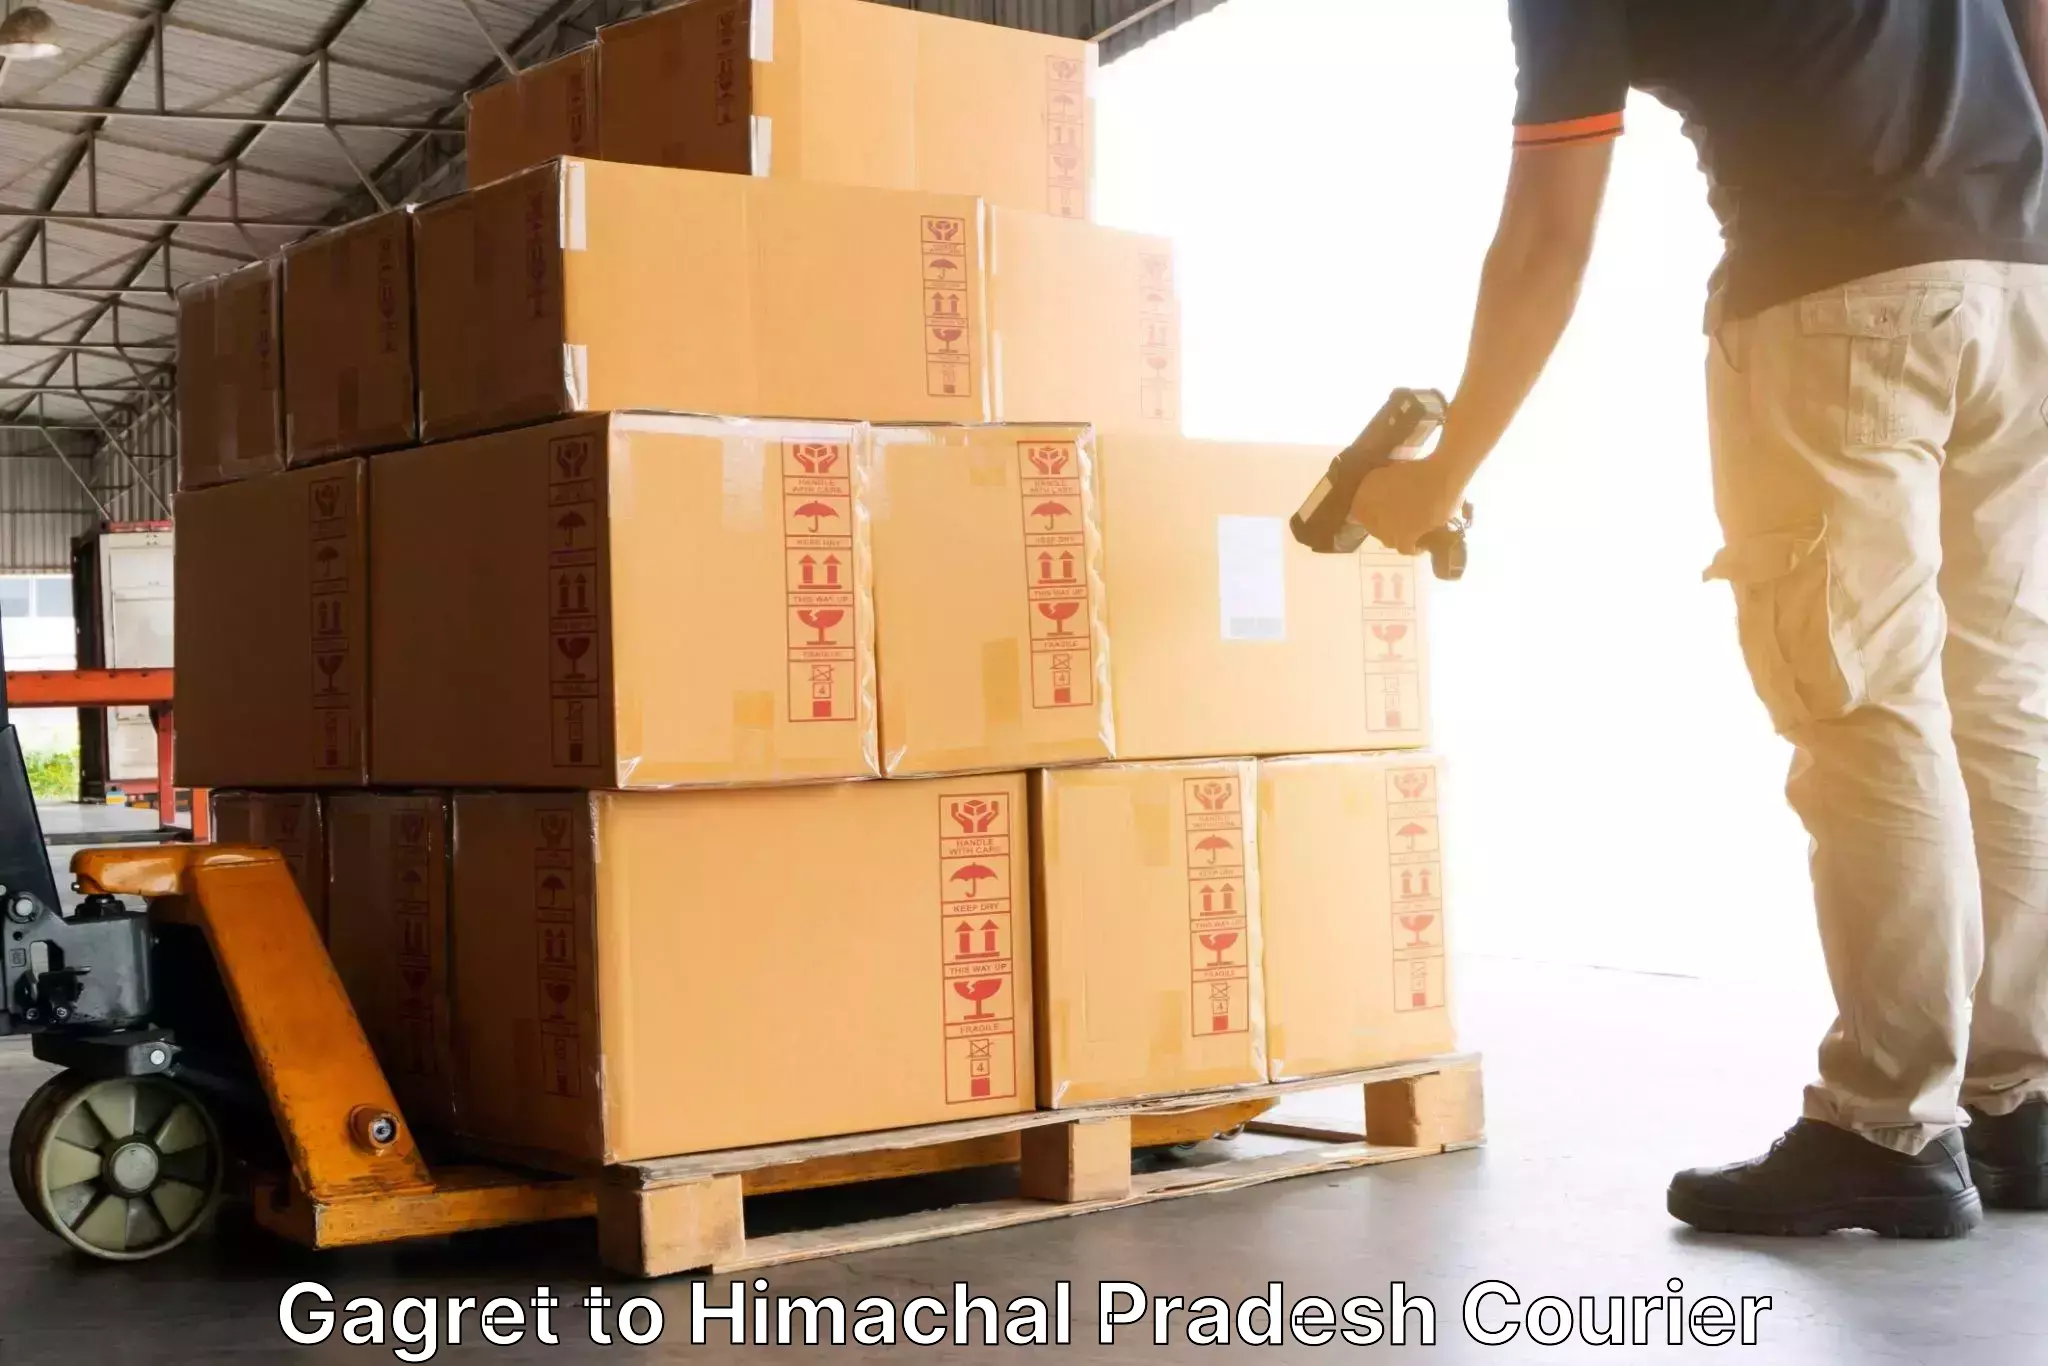 End-to-end delivery Gagret to Himachal Pradesh